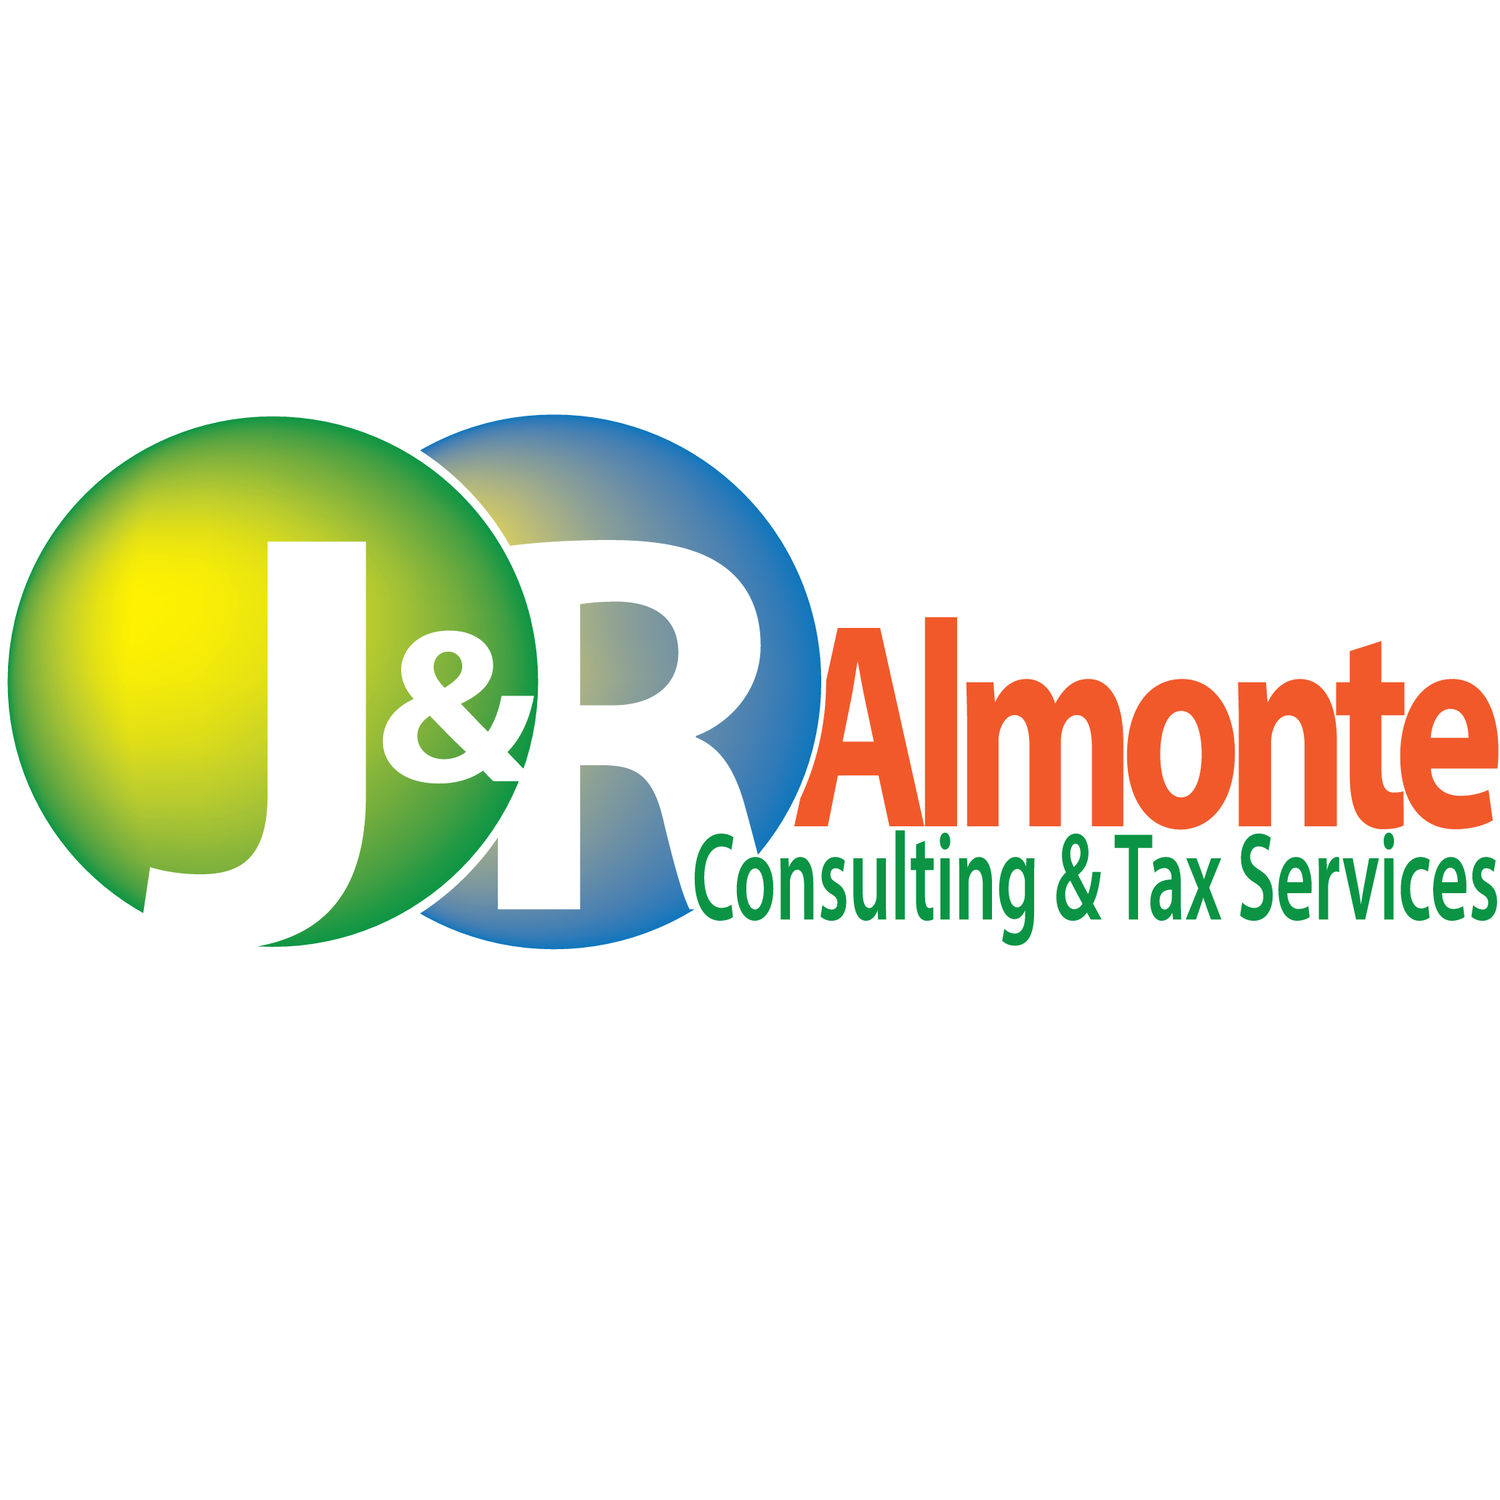 Almonte Consulting & Tax Services - Allentown, PA 18102 - (610)351-7961 | ShowMeLocal.com